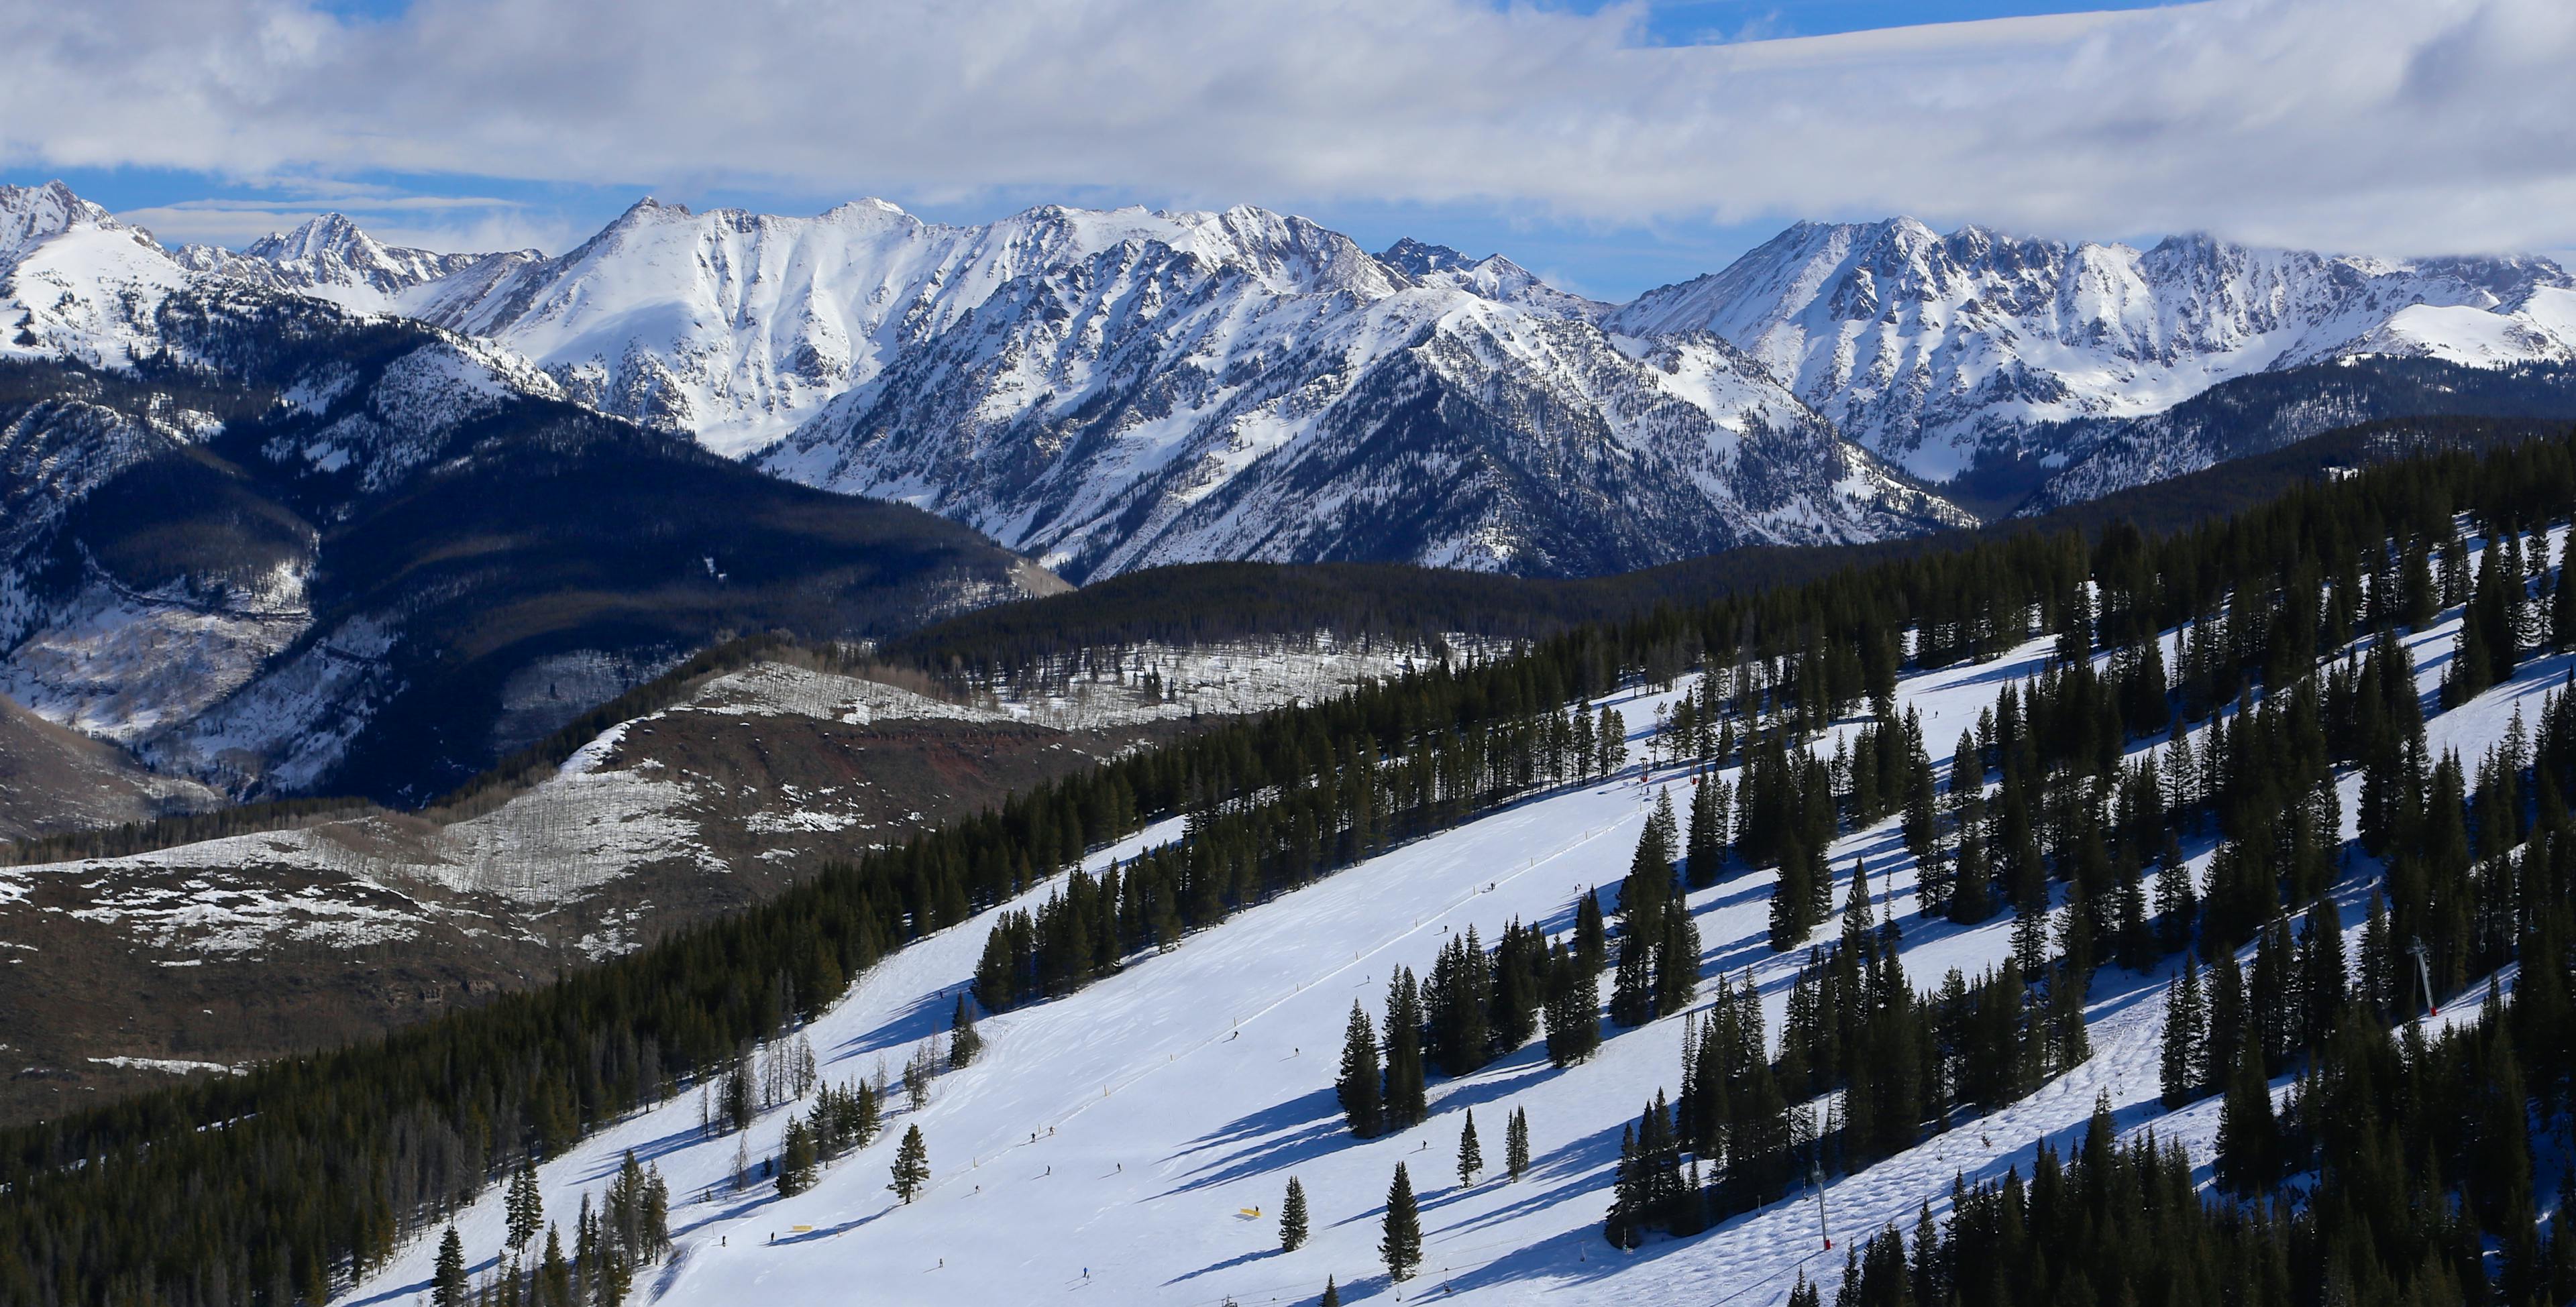 Vail ski run with view of the Gore Range